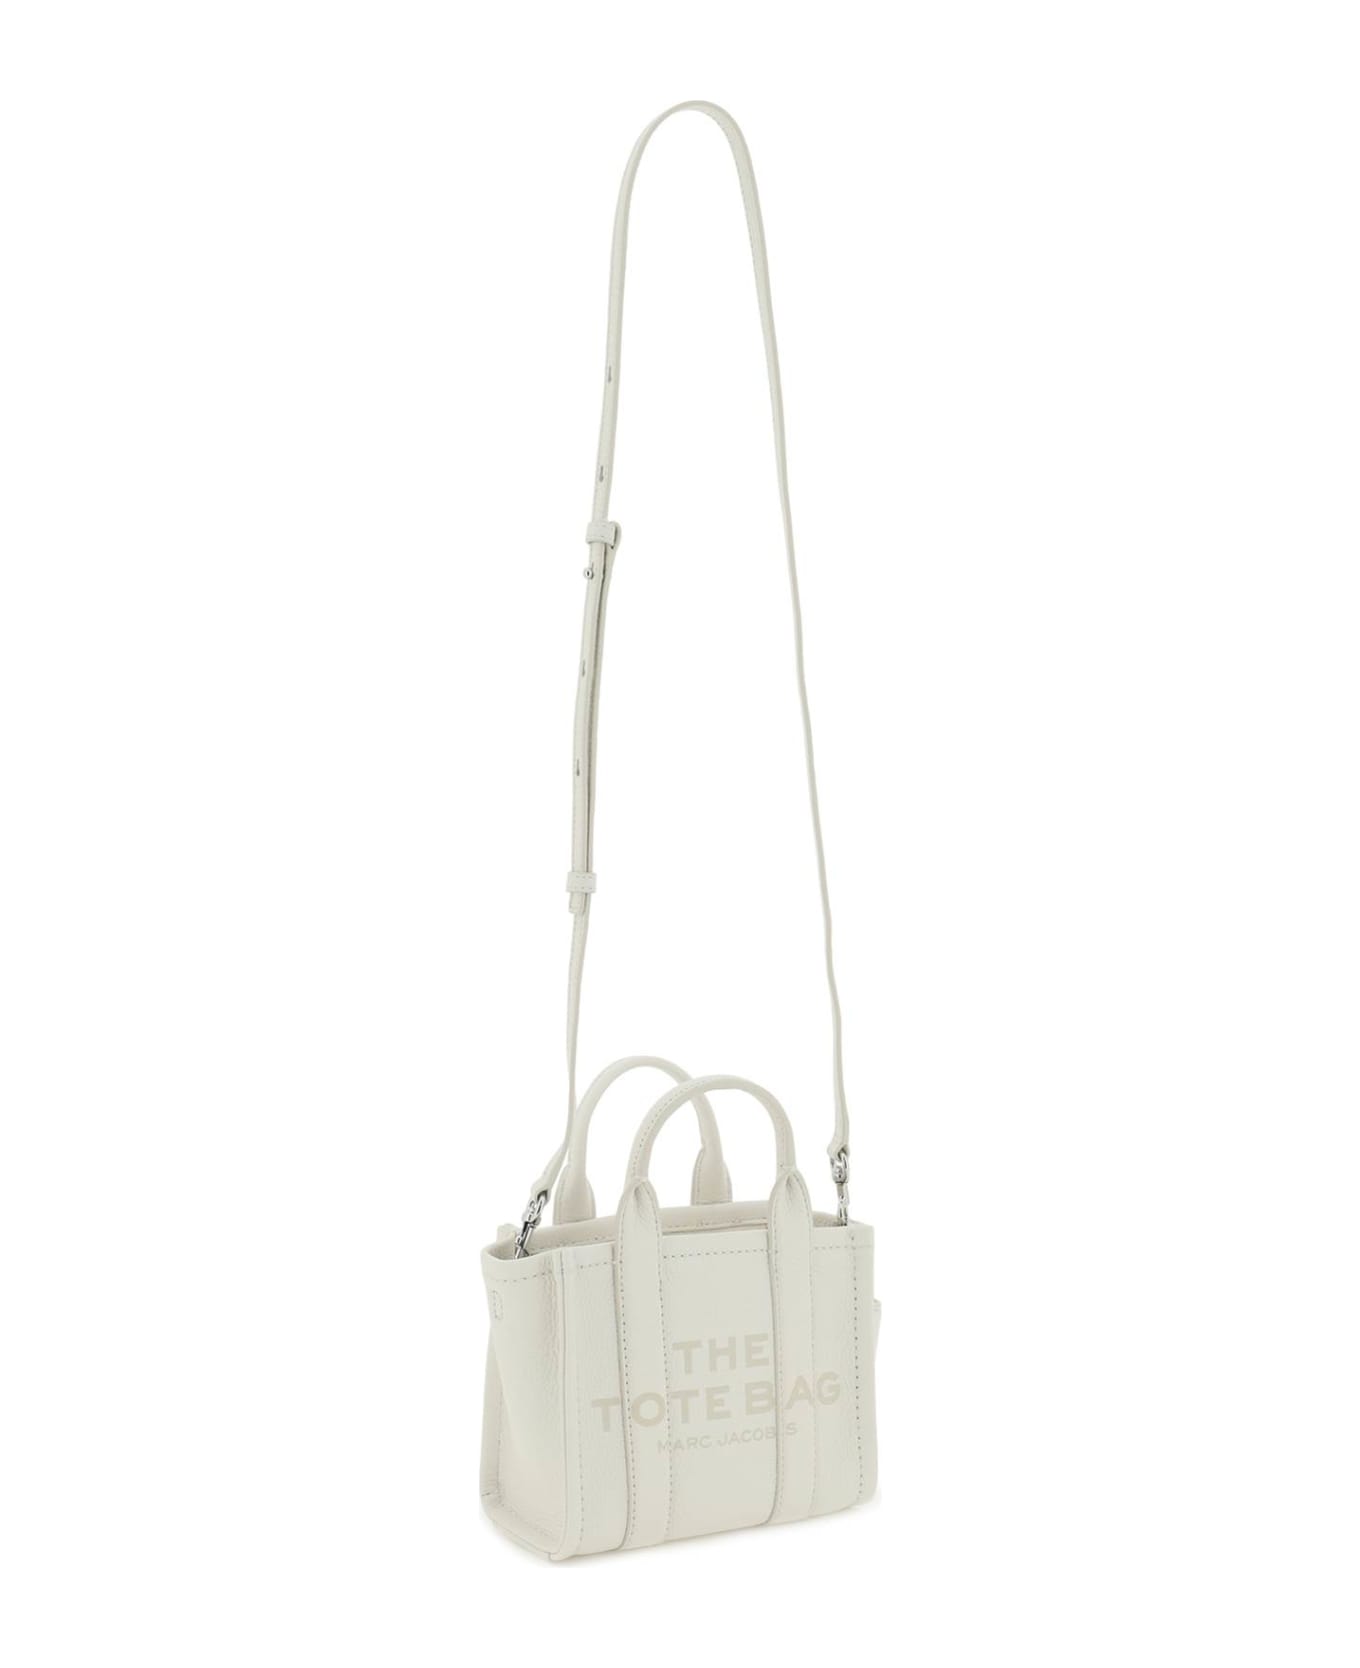 Marc Jacobs 'the Leather Micro Tote Bag' - Cotton/silver